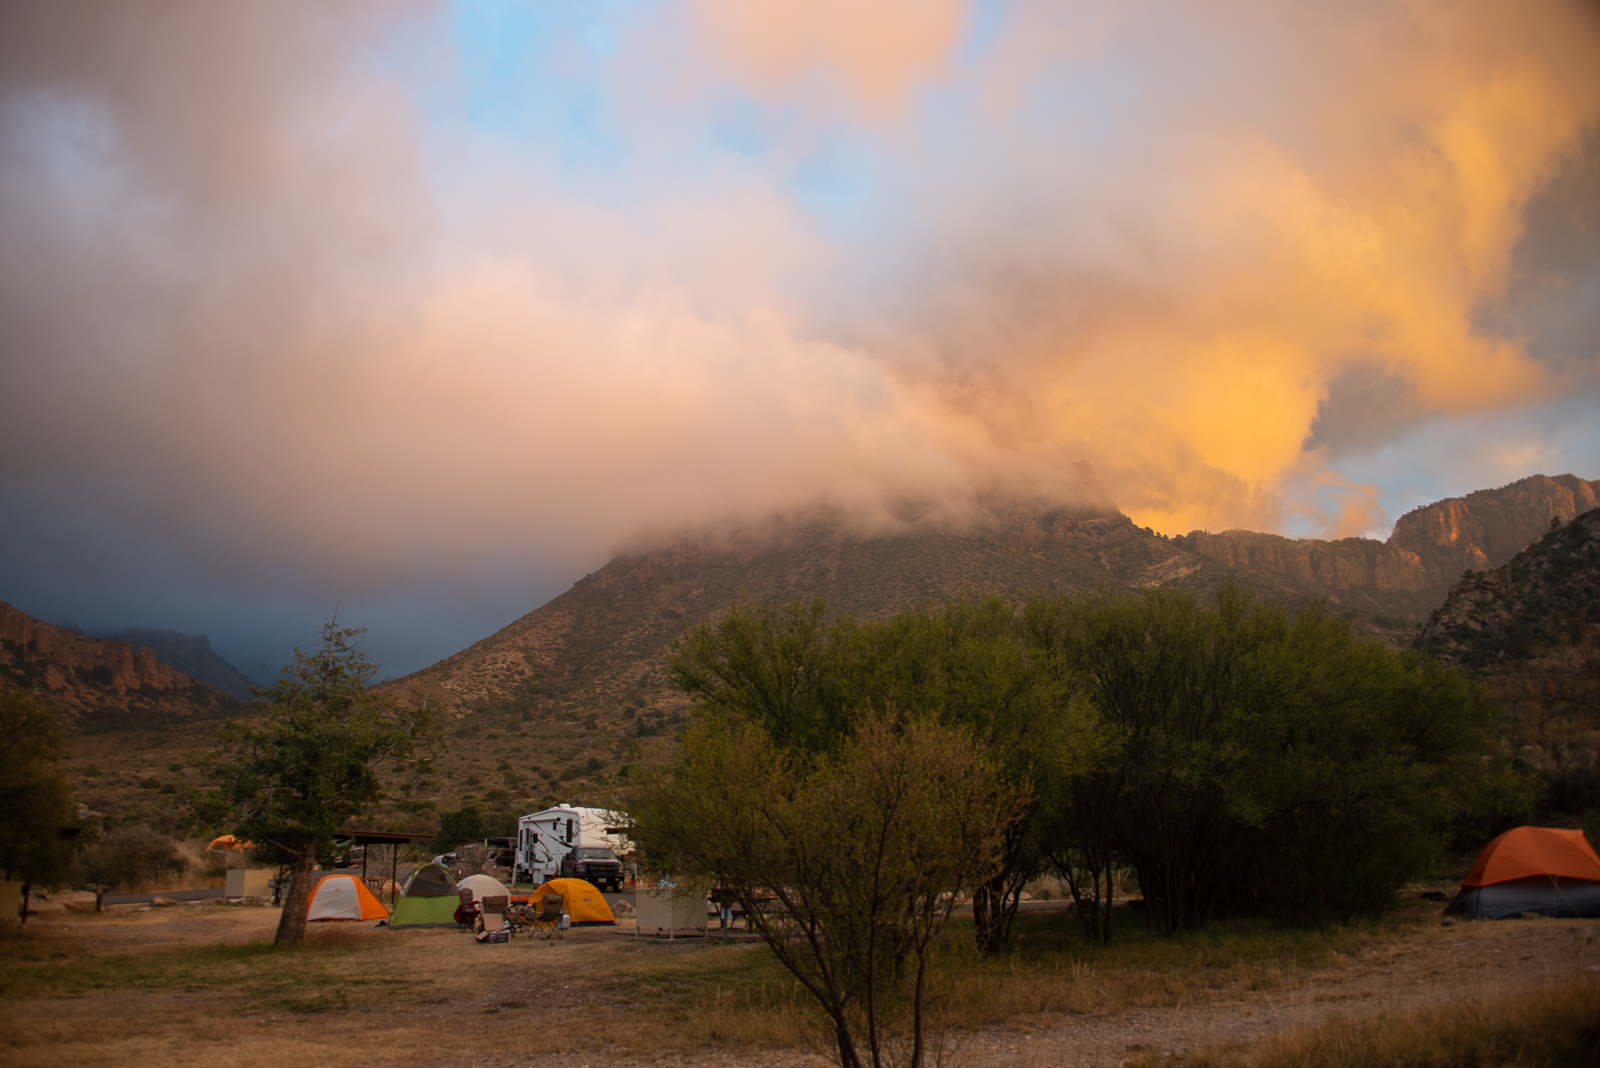 RVs and tents set up camp beside Texas' Big Bend National Park